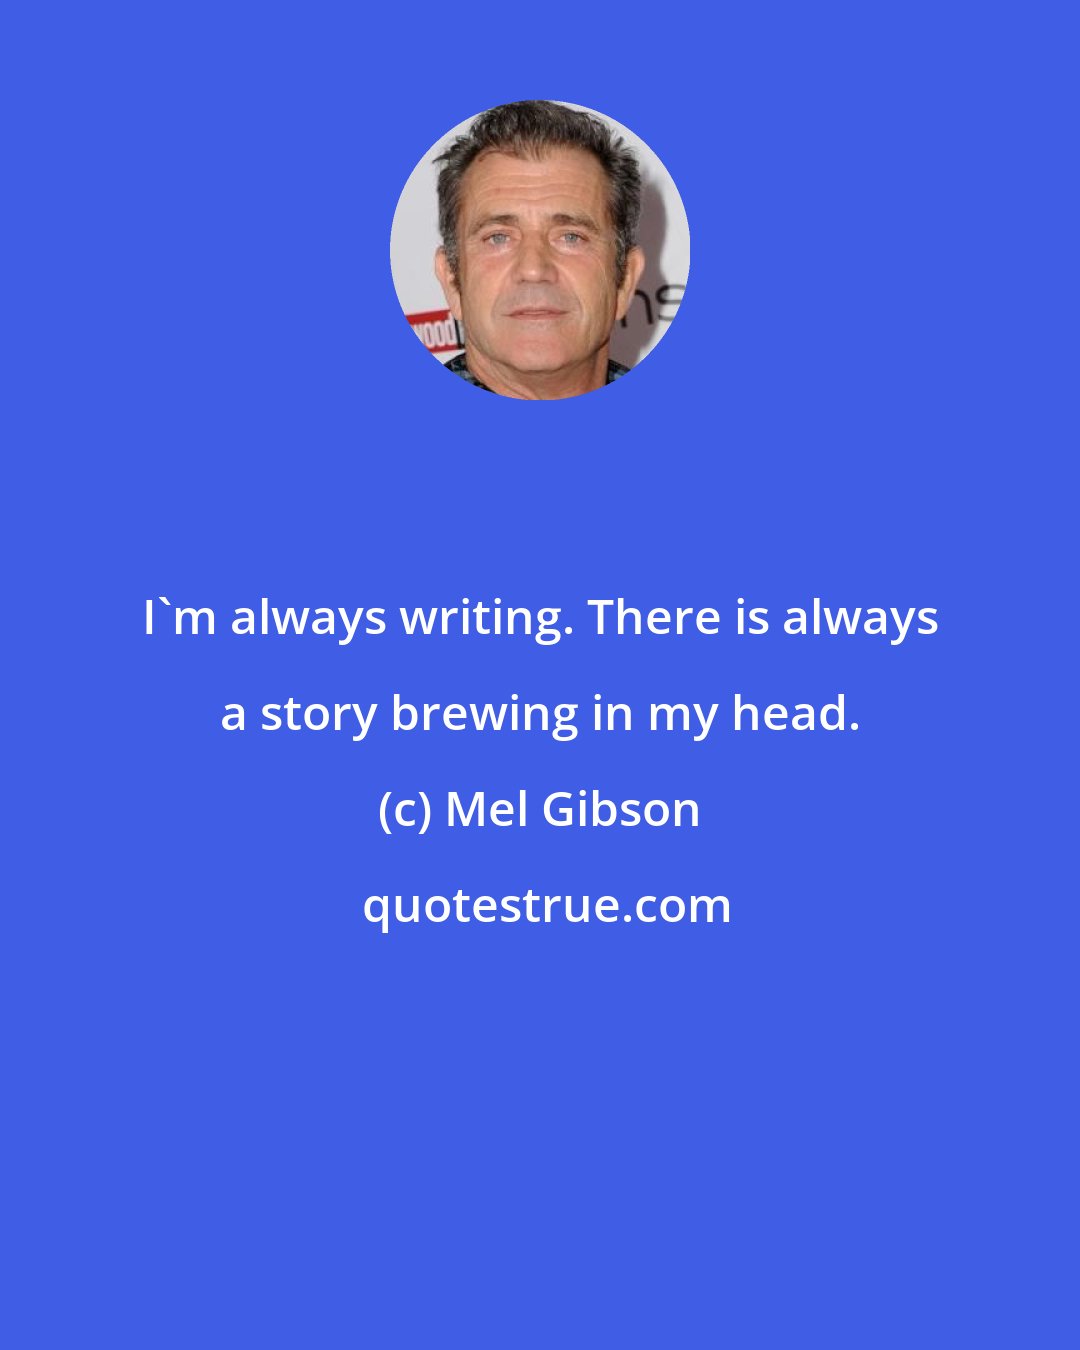 Mel Gibson: I'm always writing. There is always a story brewing in my head.